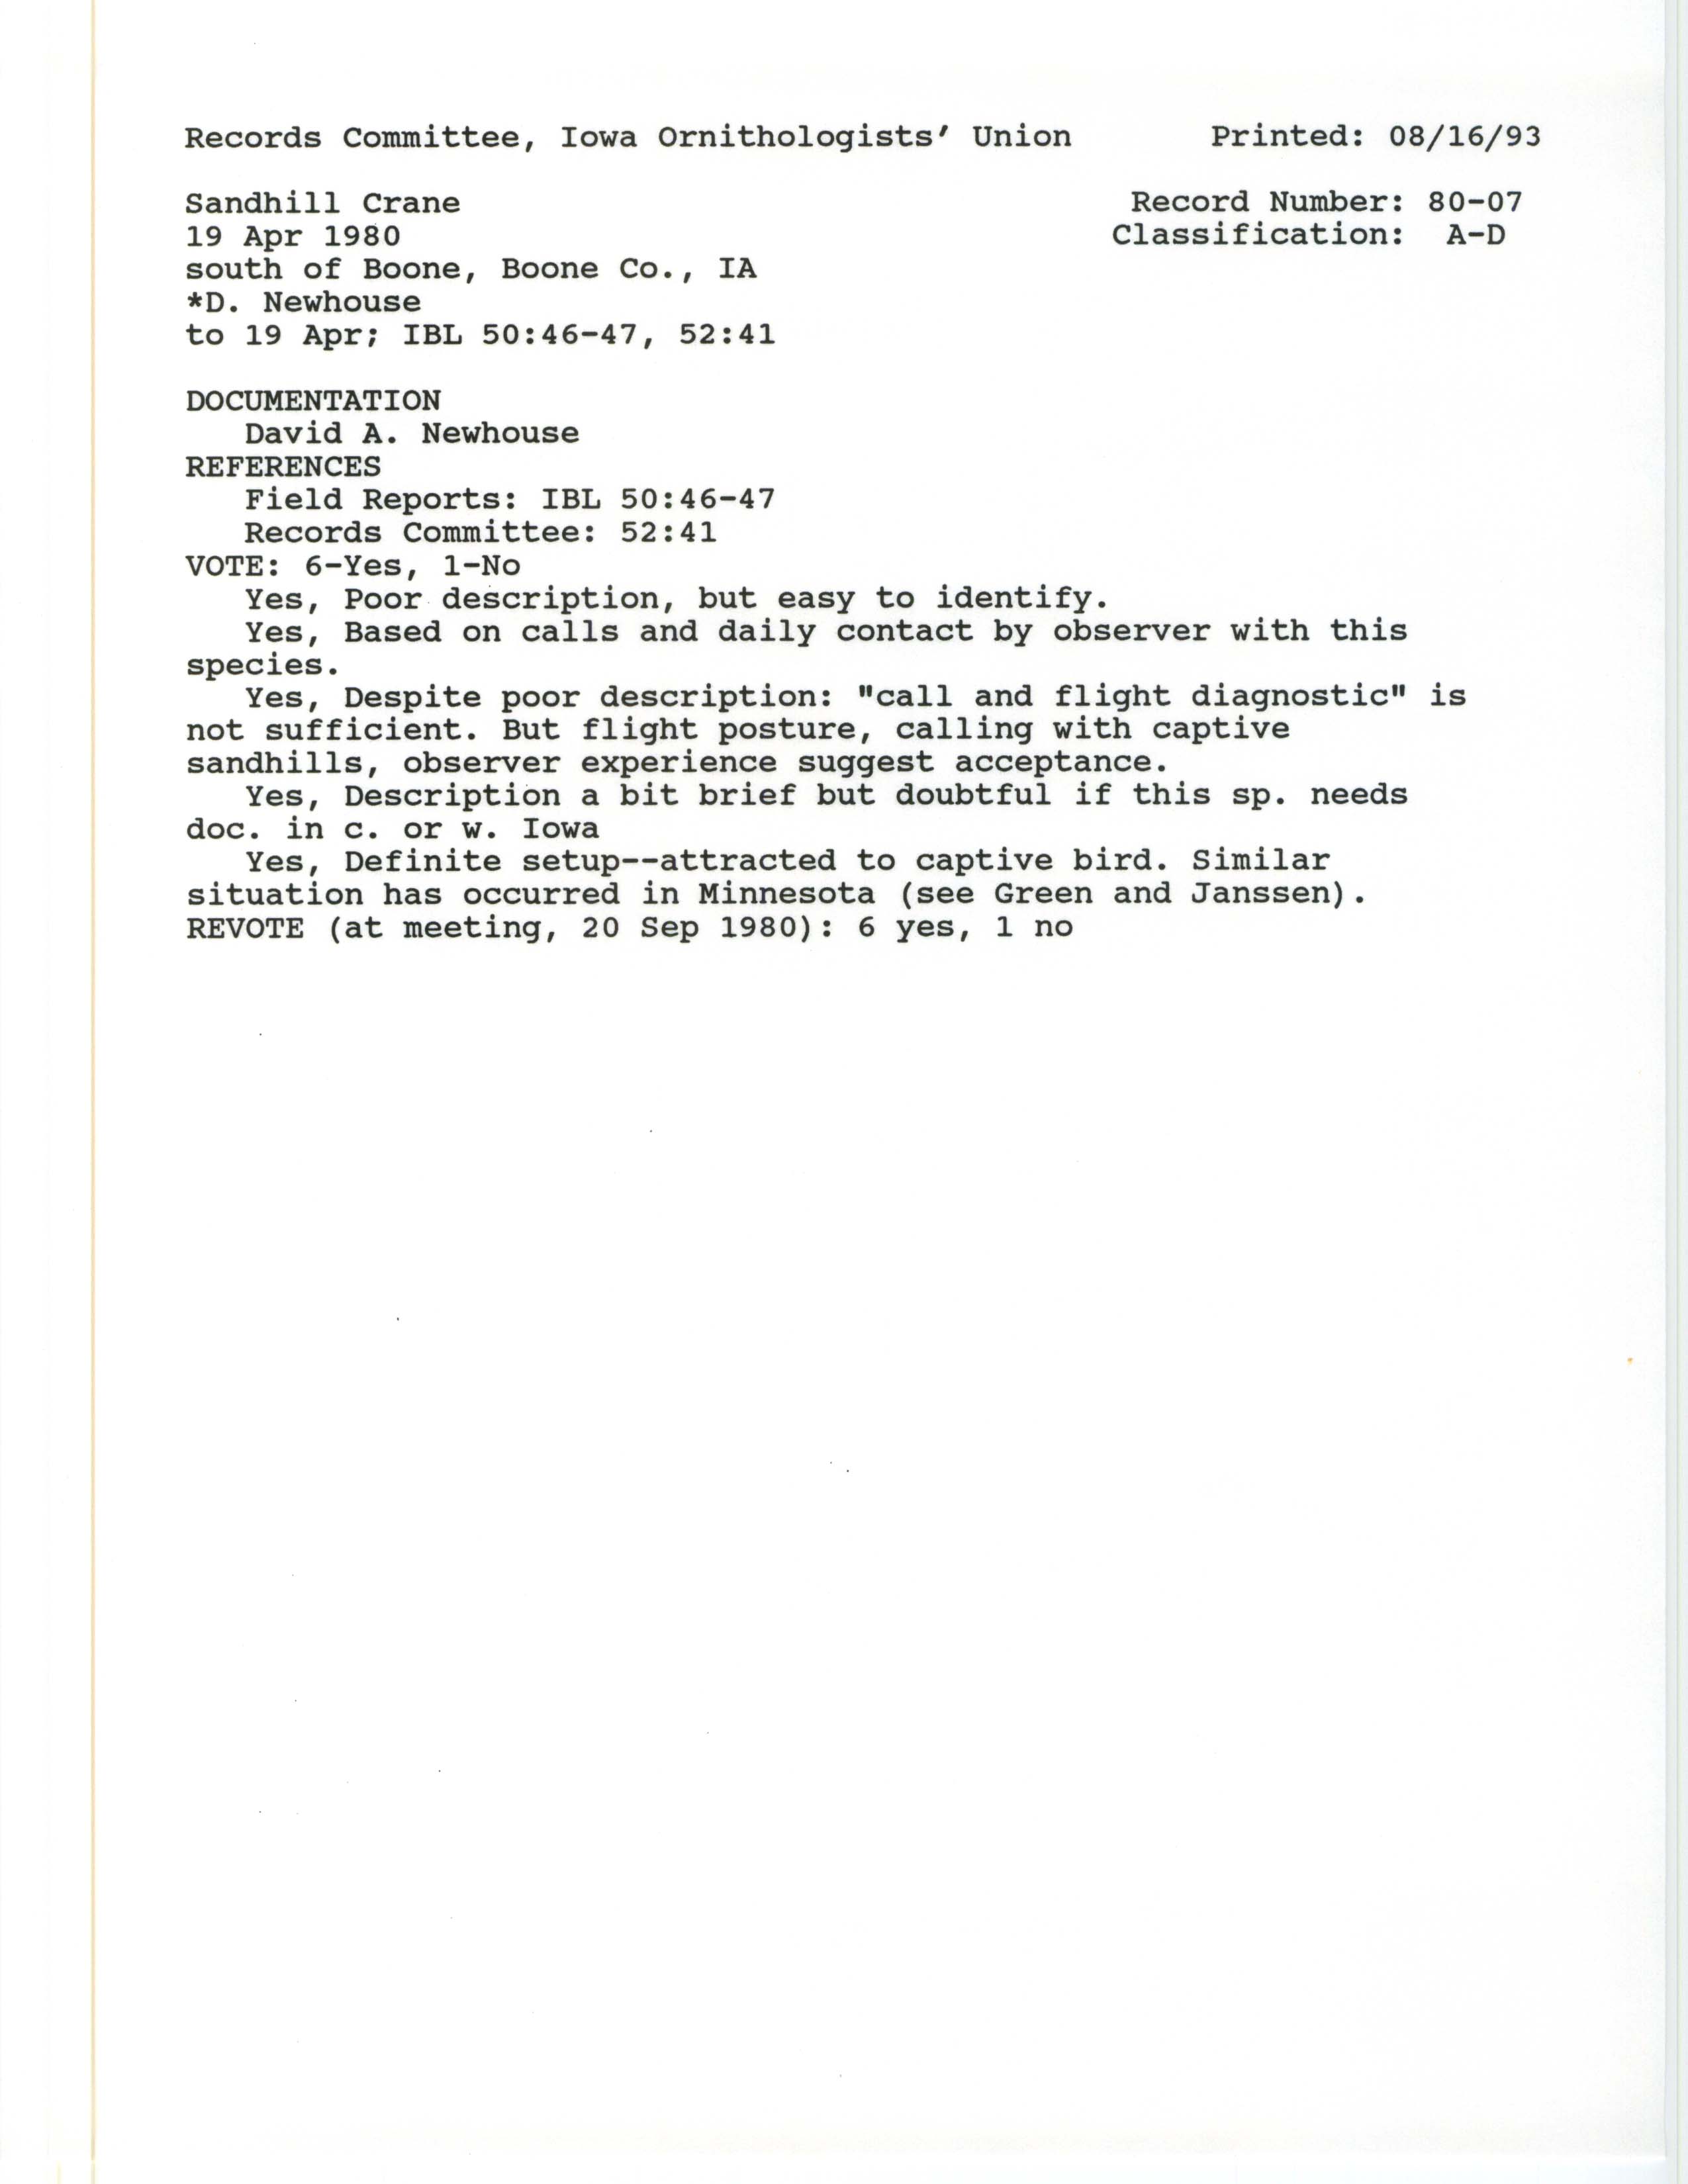 Record Committee review for rare bird sighting of Sandhill Crane south of Boone, 1980